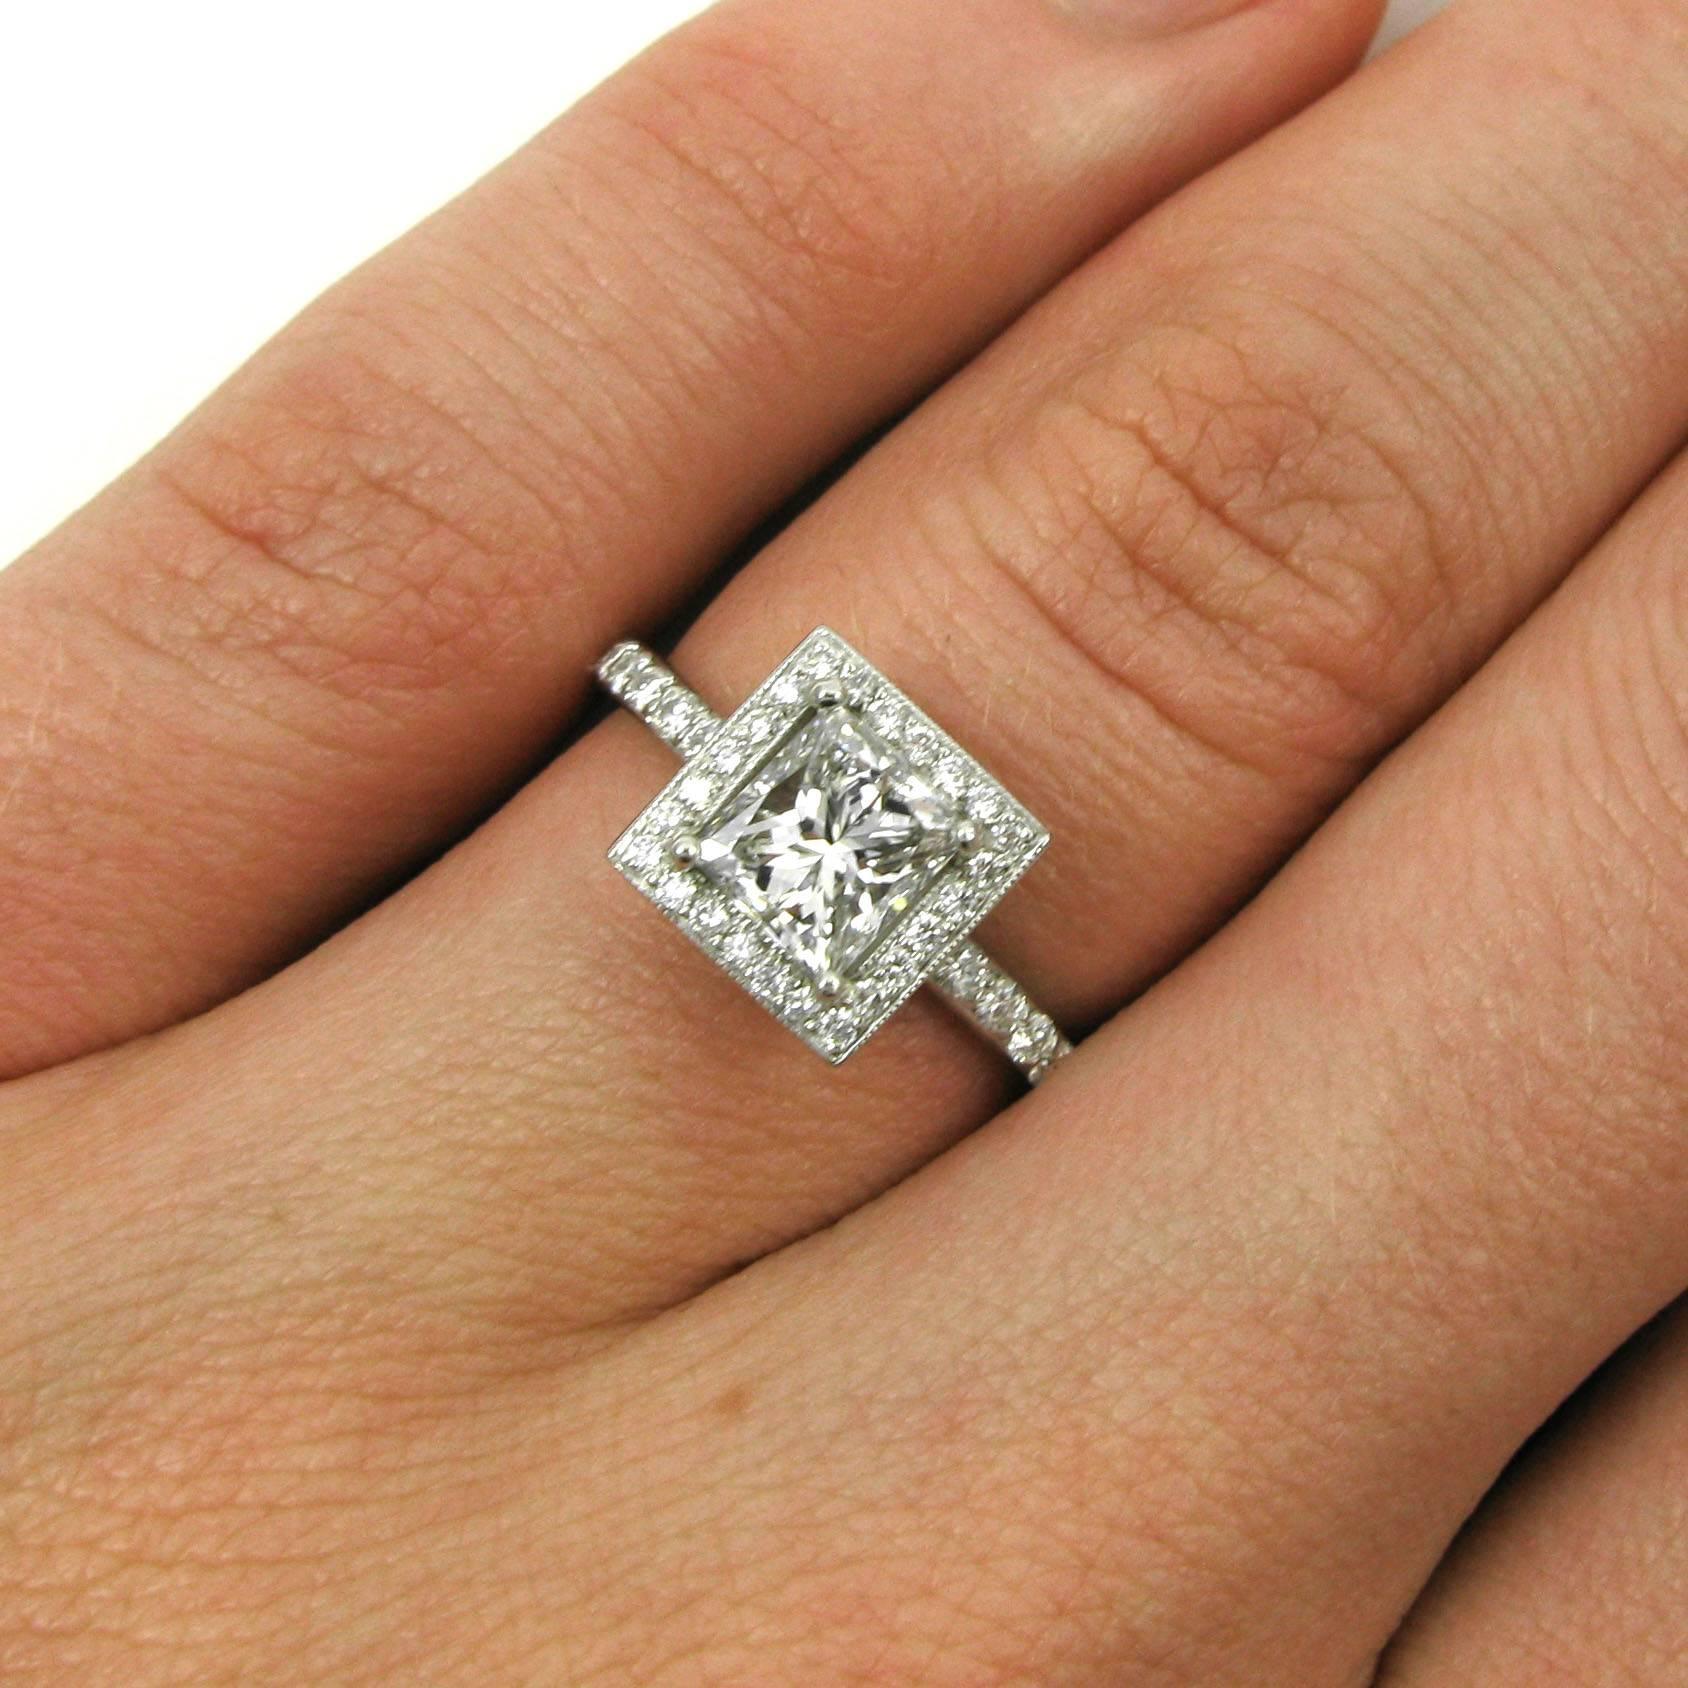 A lovely 0.90 princess-cut diamond with E color and VS1 clarity is set into a handmade platinum frame ring with pave shoulders and halo and a lovely filigree boxed gallery. 

Purchase includes GIA Diamond Grading Report 2131246038, which states that